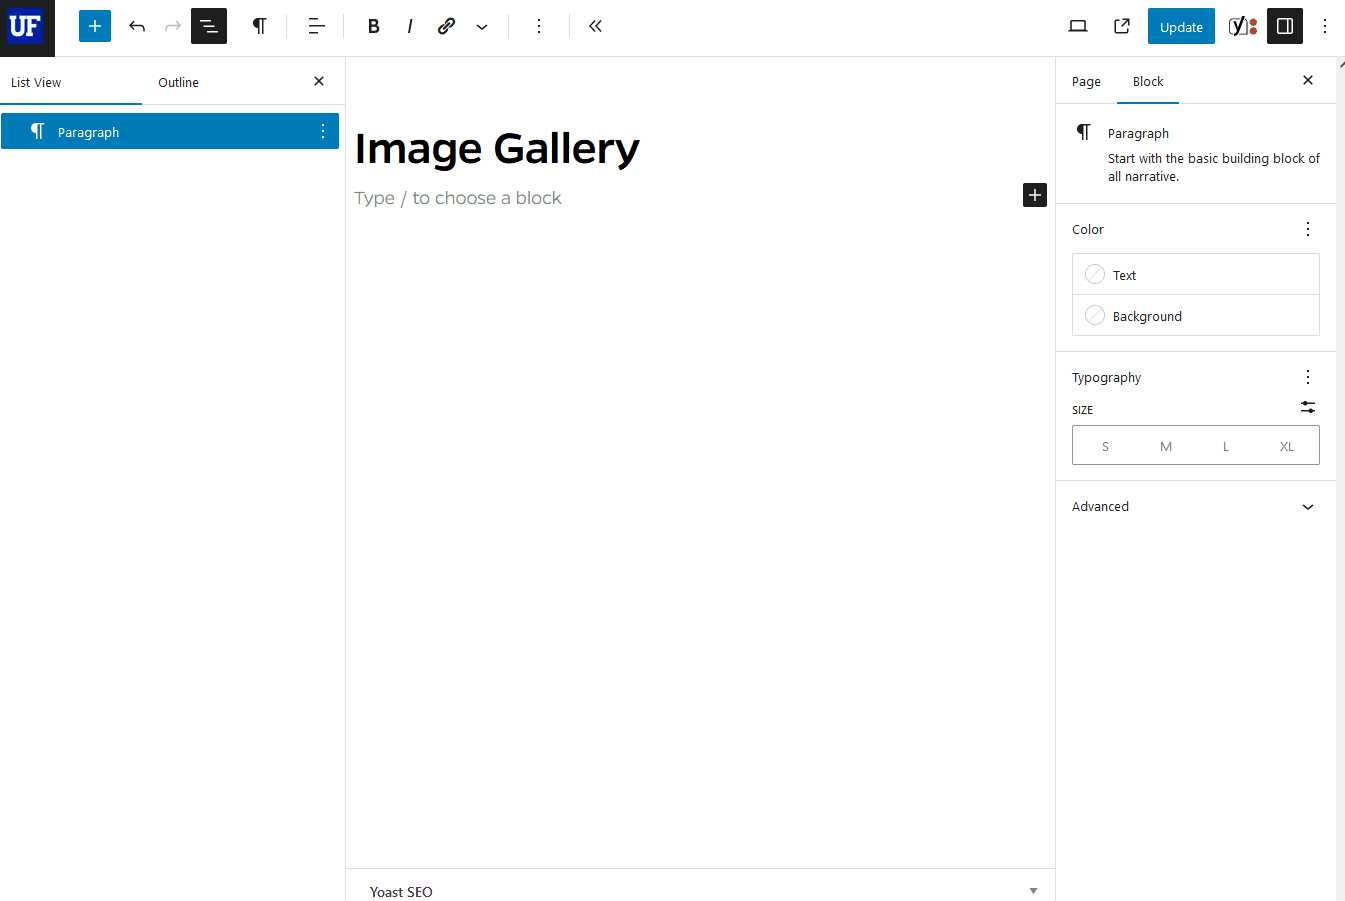 How to add an image gallery block in Mercury